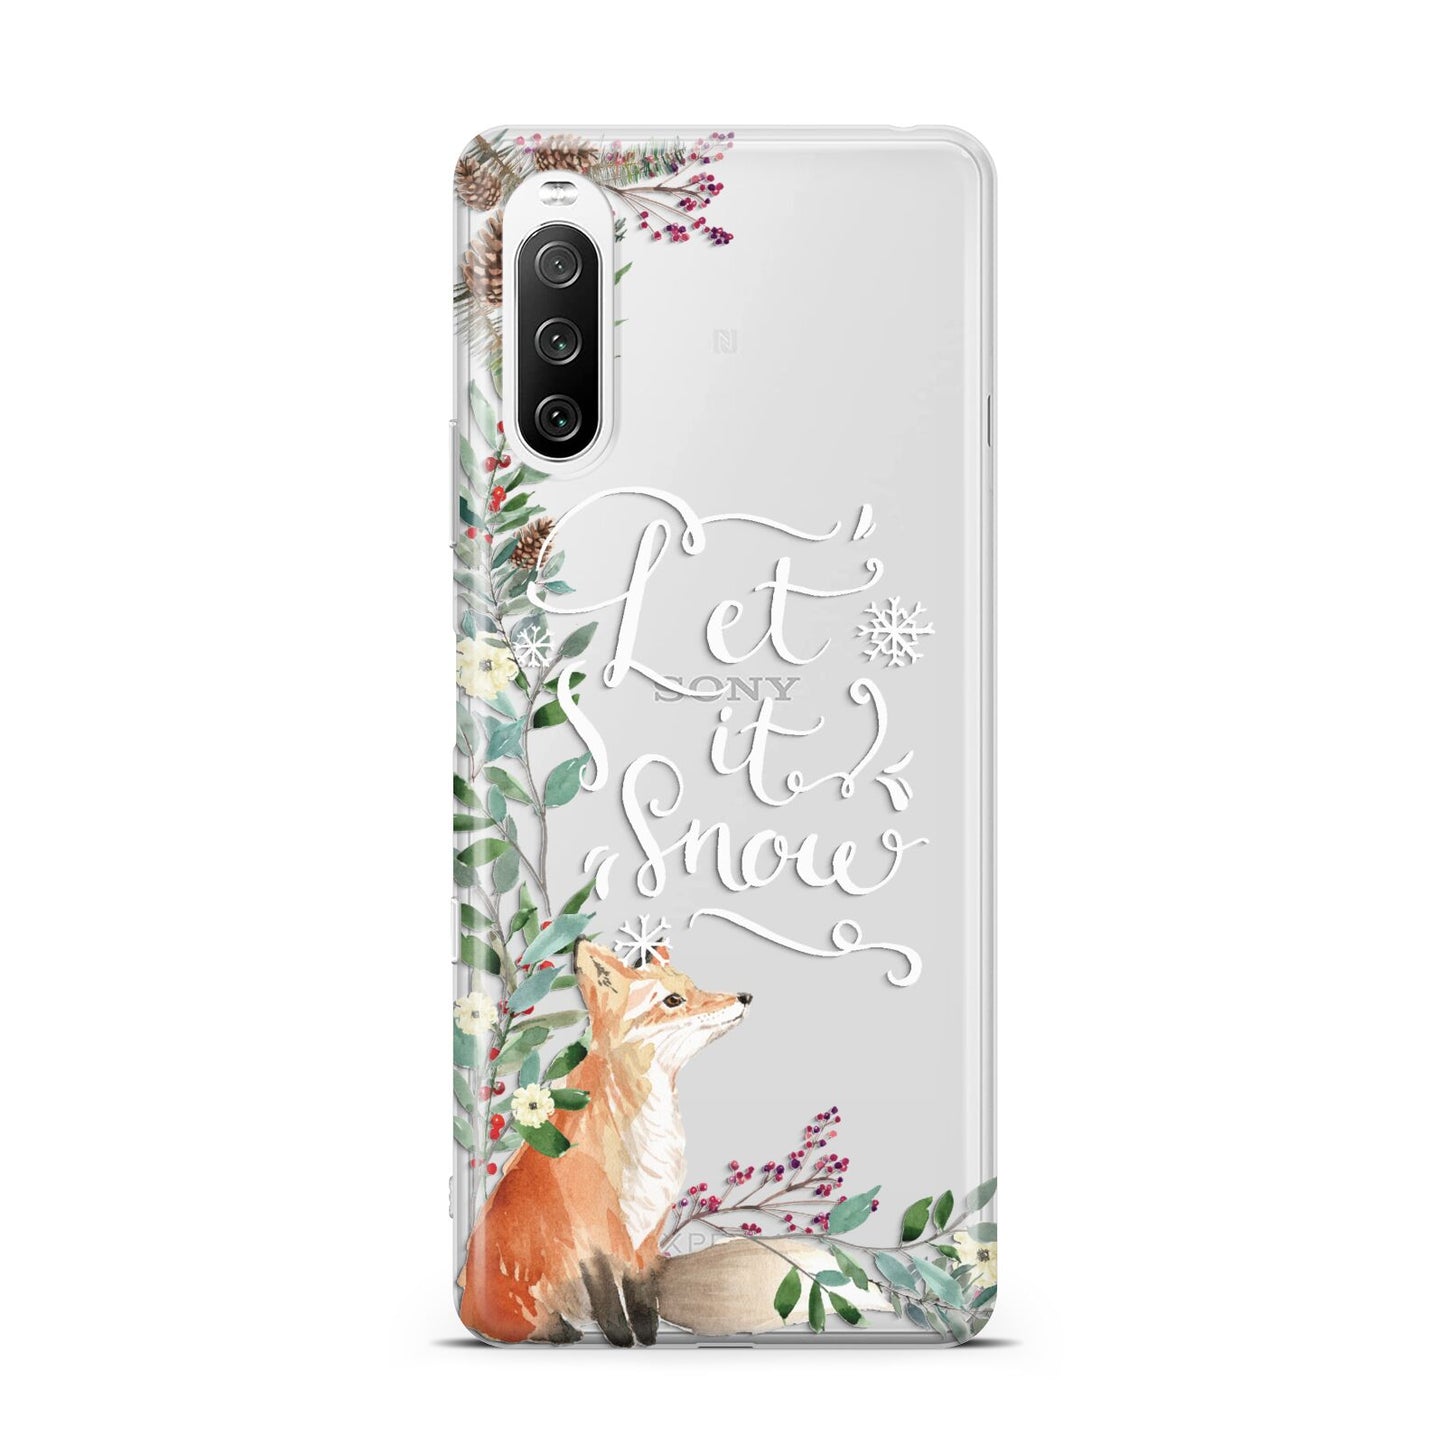 Let It Snow Christmas Sony Xperia 10 III Case